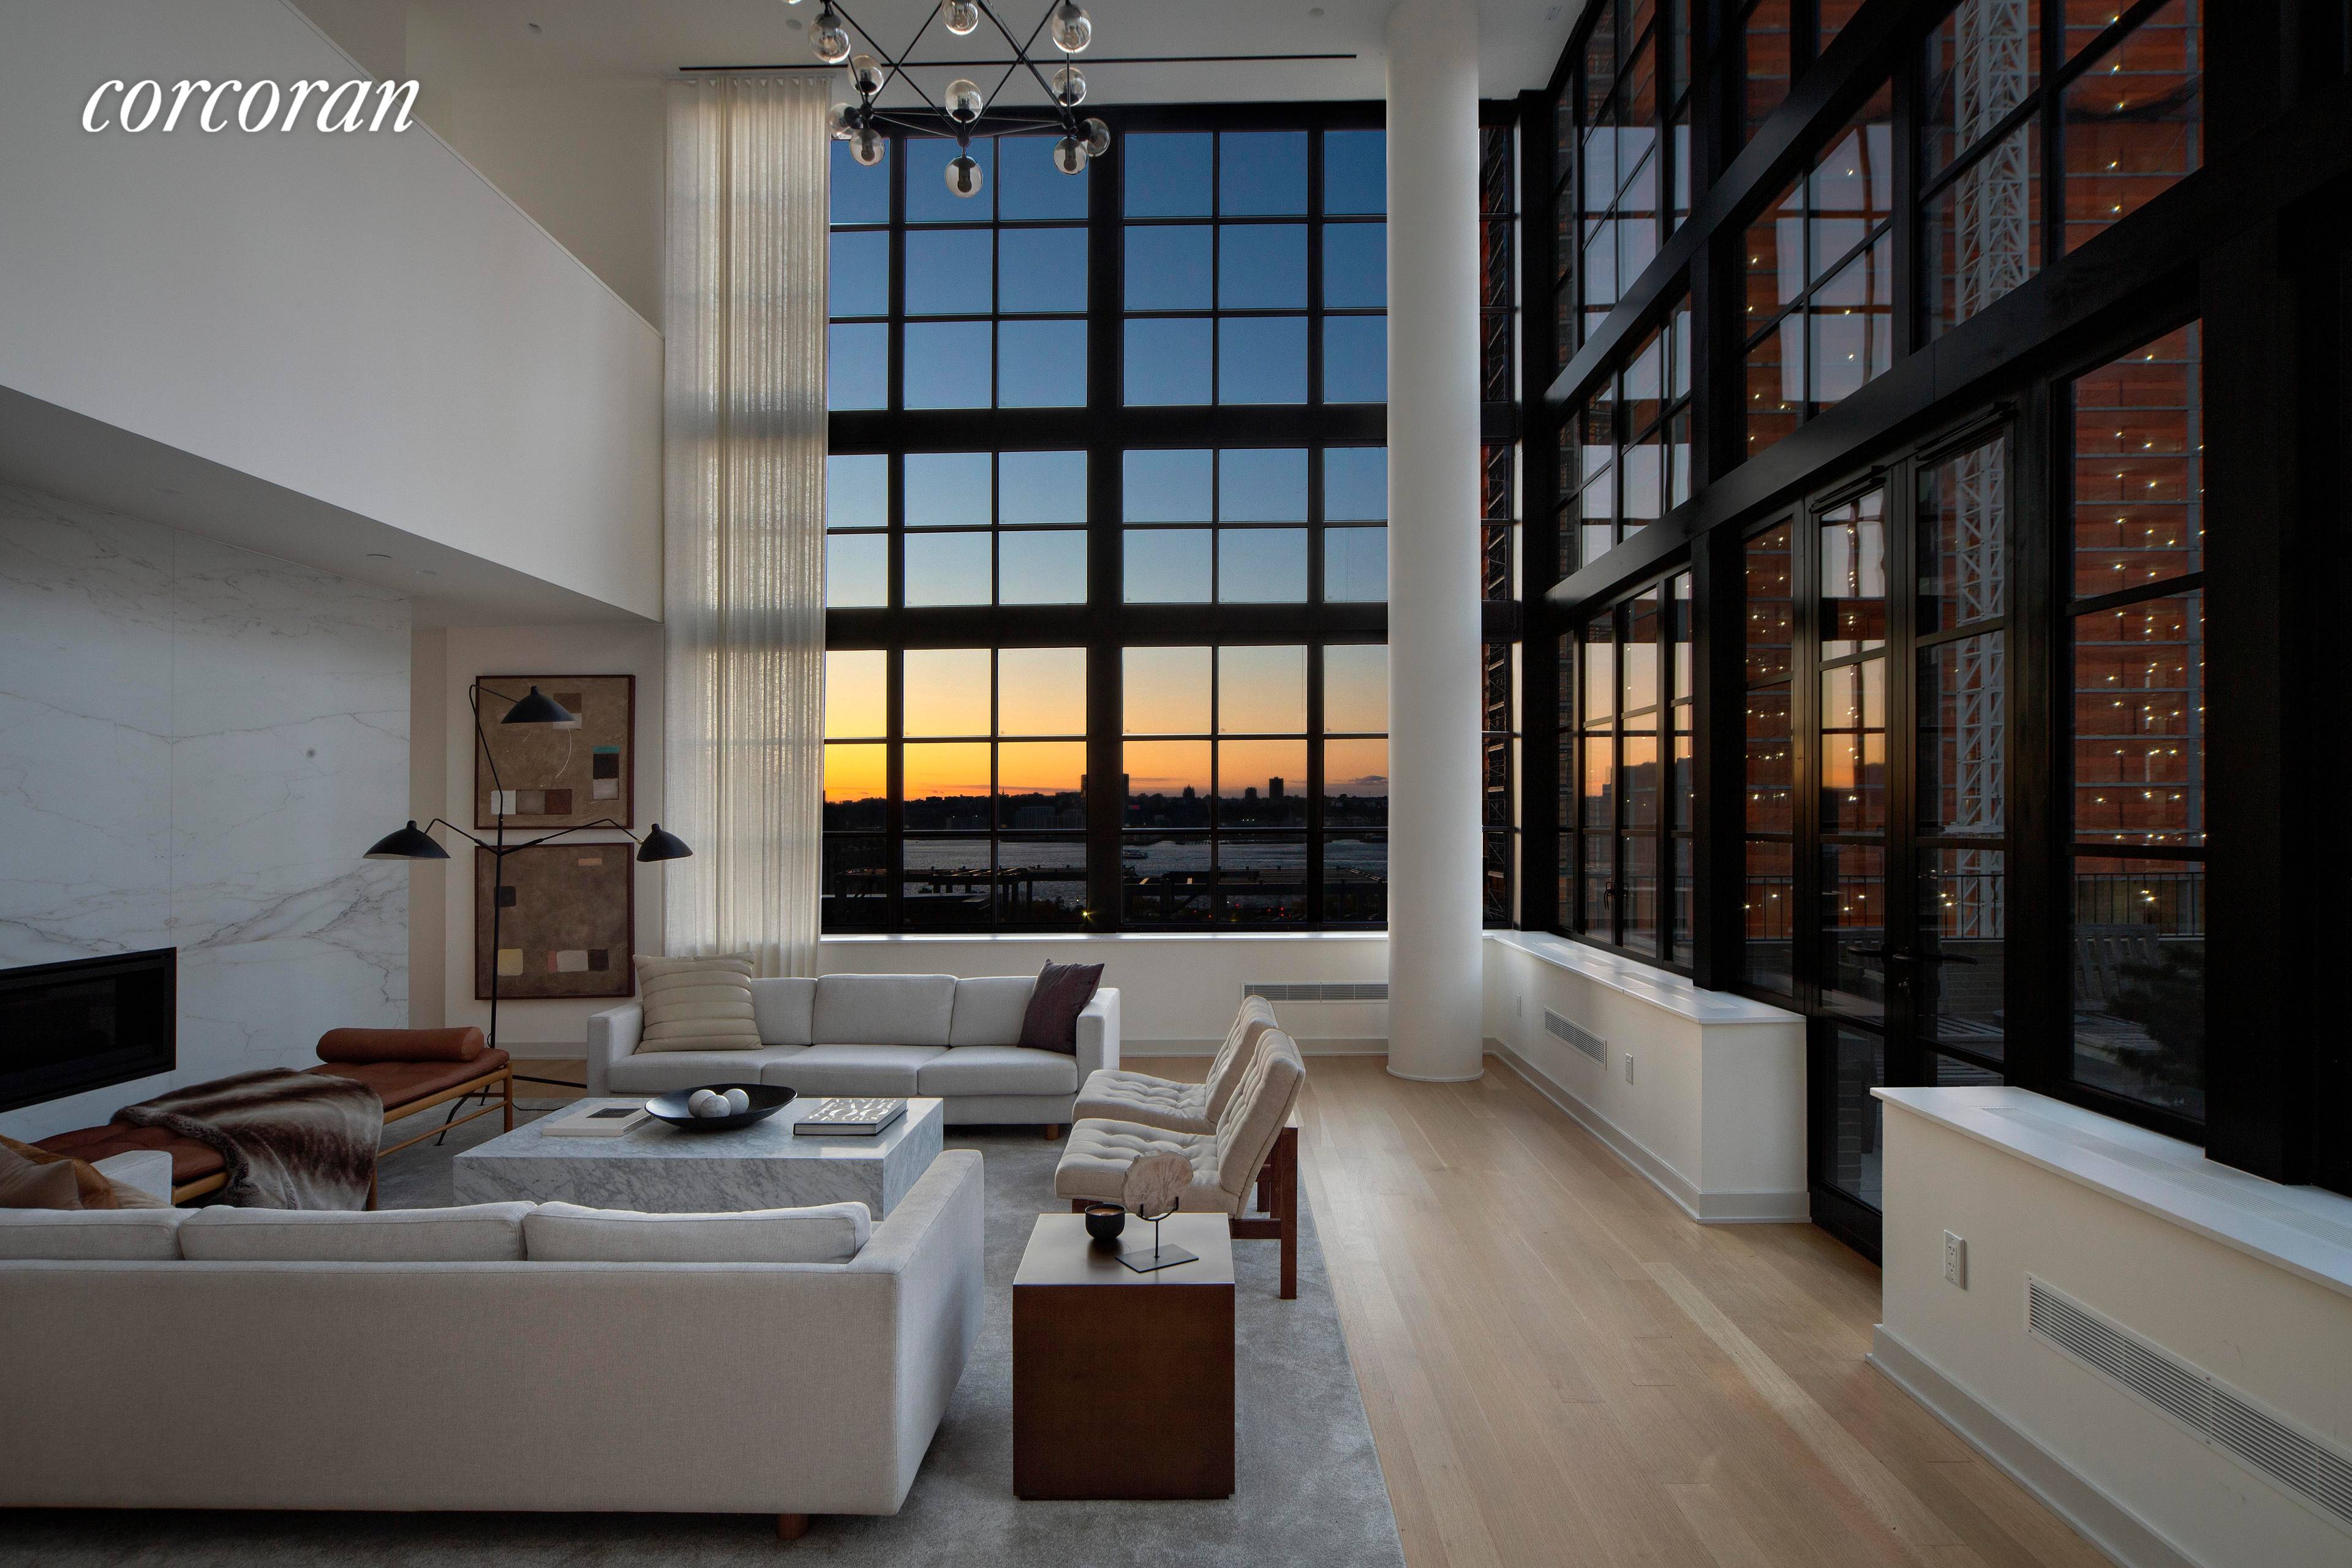 IMMEDIATE OCCUPANCYIntroducing Five Five Zero, a brand new West Chelsea condominium located between the High Line and the Hudson River.